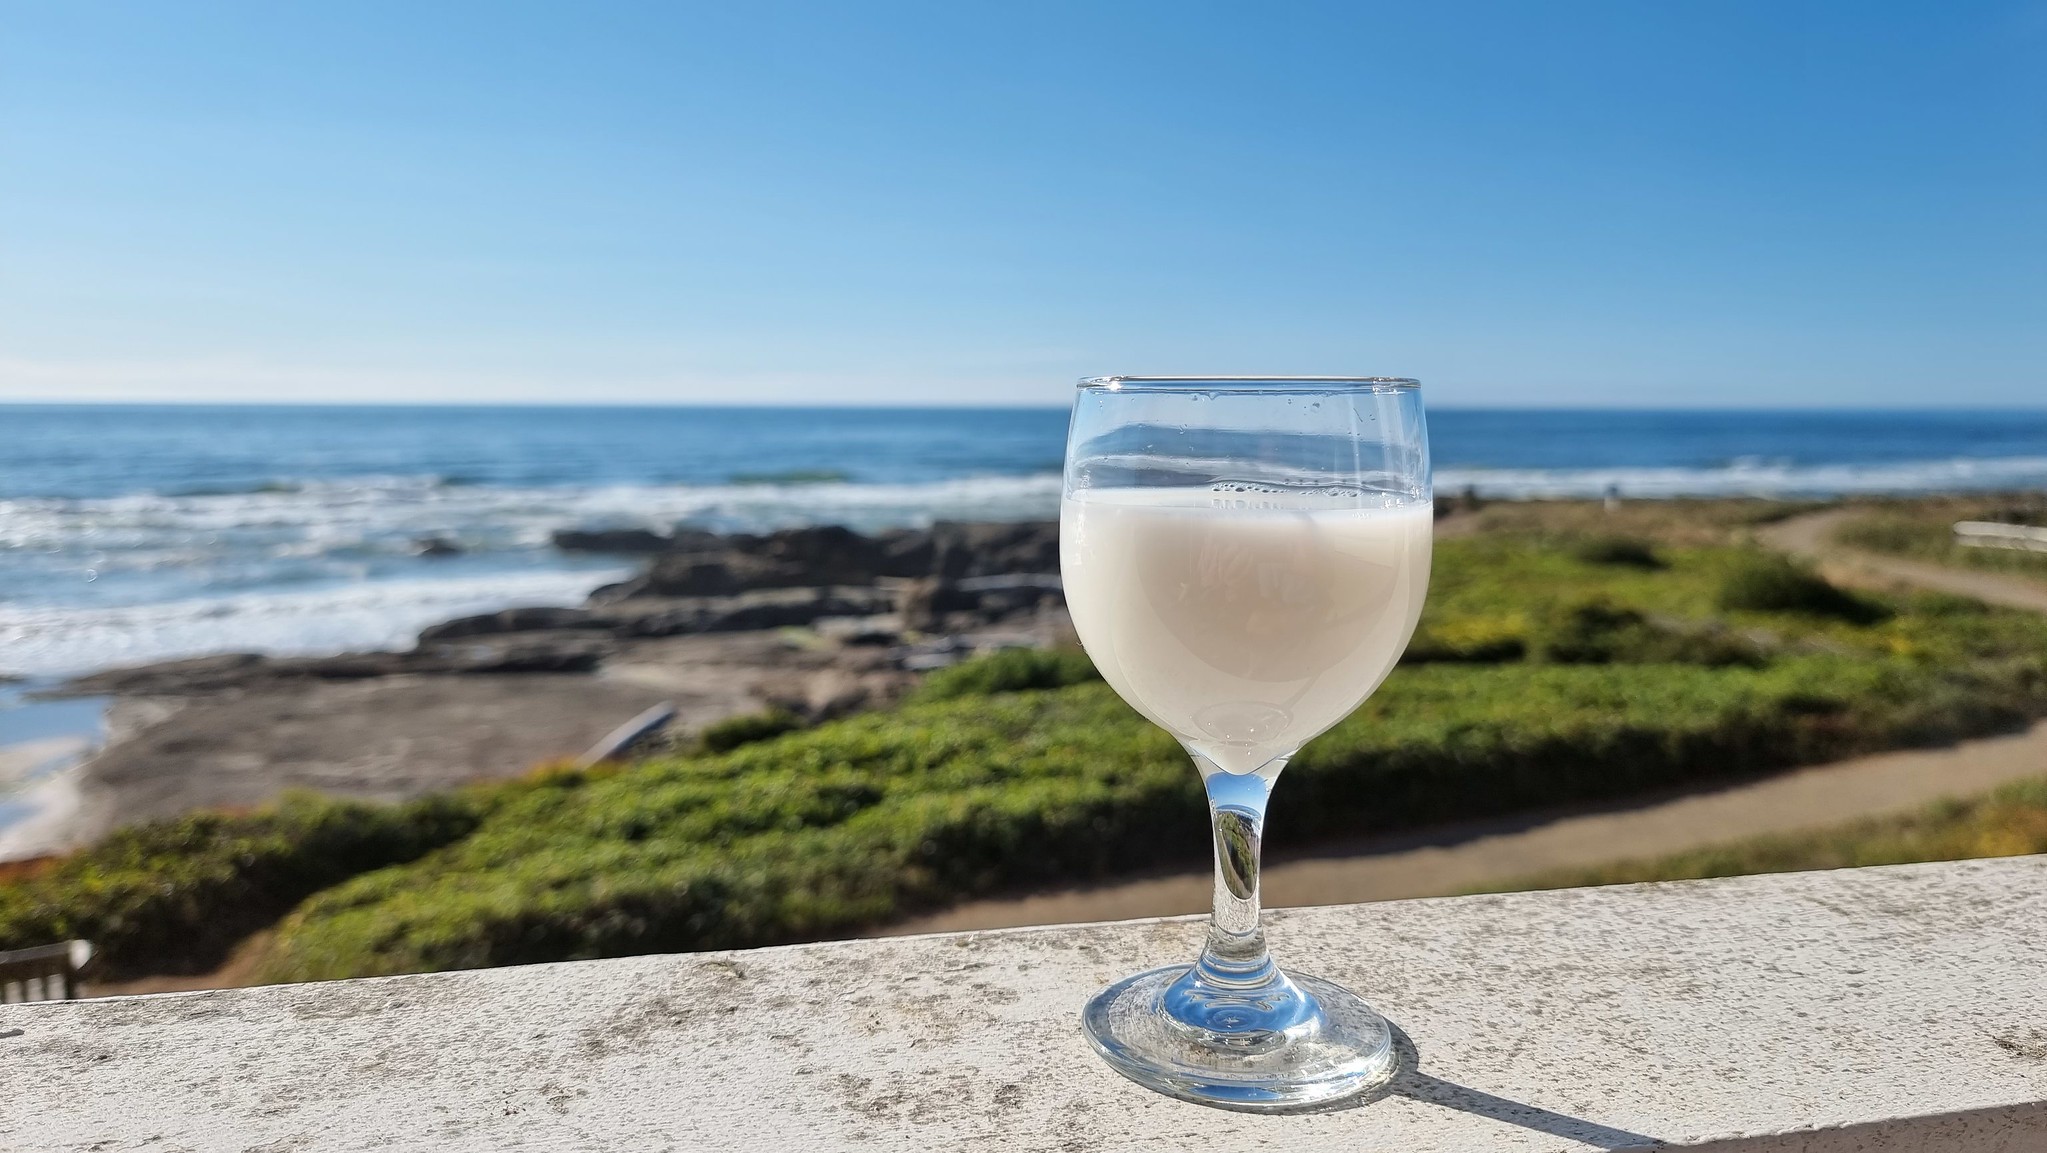 Pina colada enjoyed on our balcony in Yachats Yachats